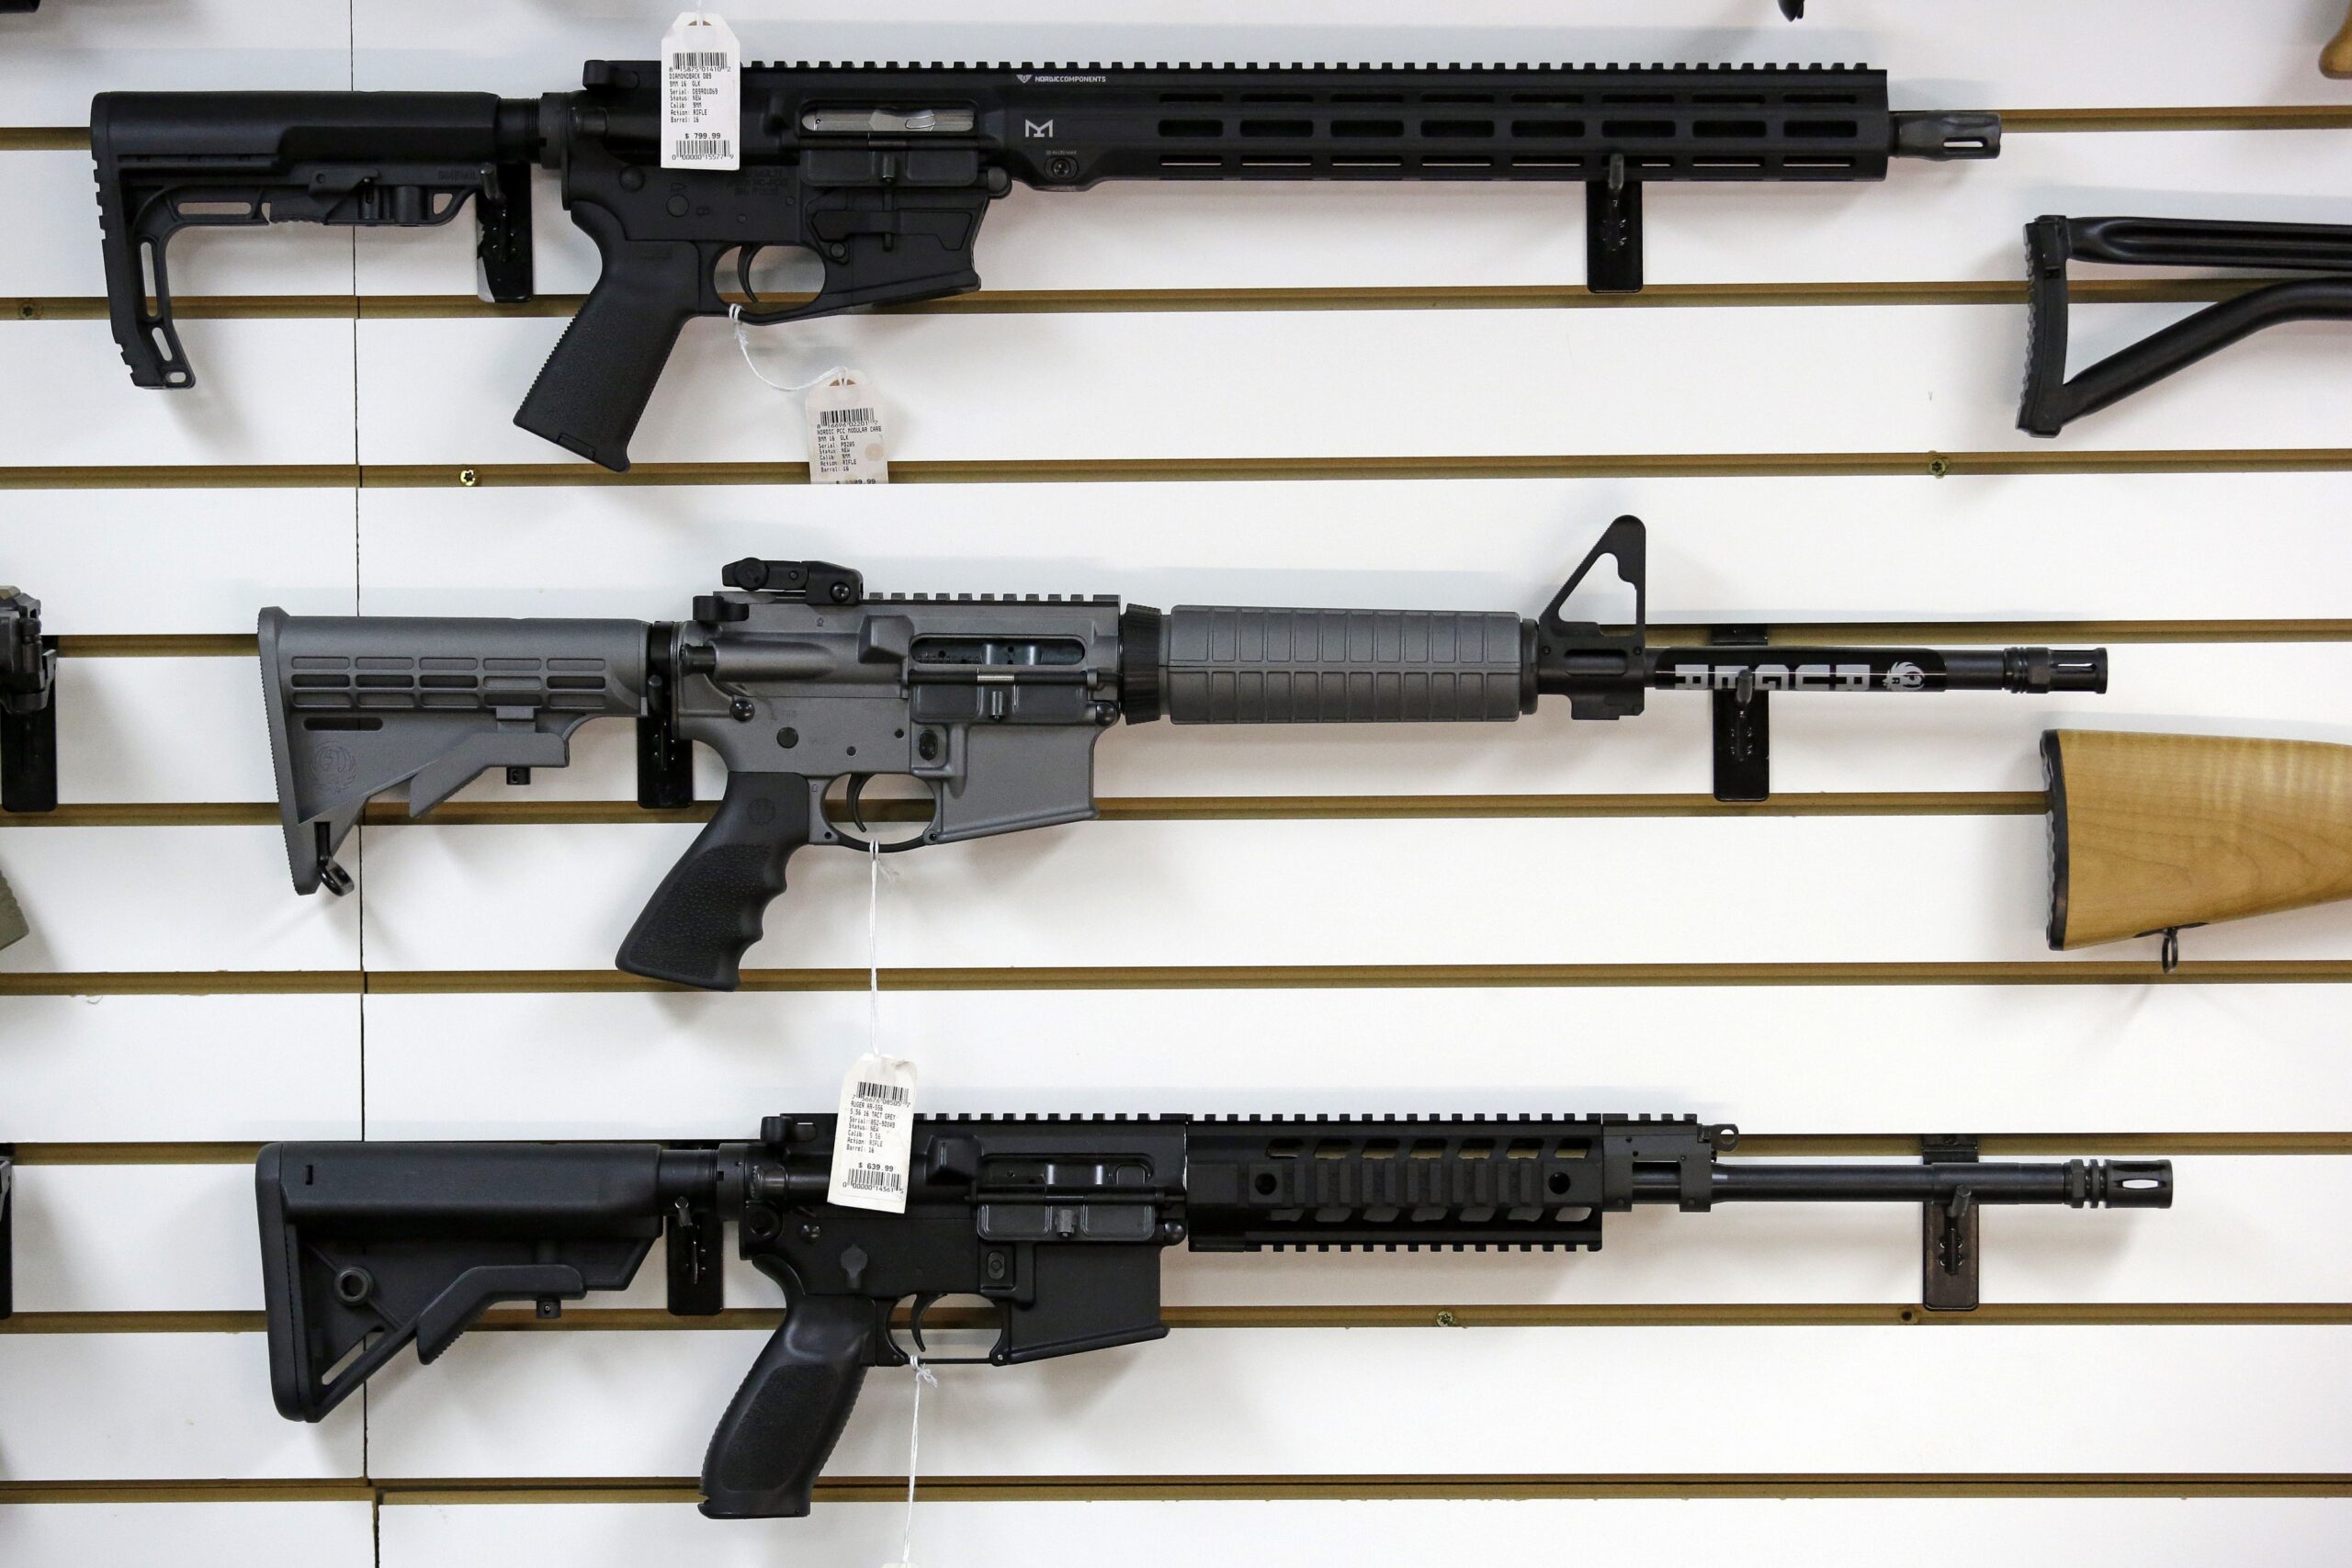 Ruger AR-15 semi-automatic rifle